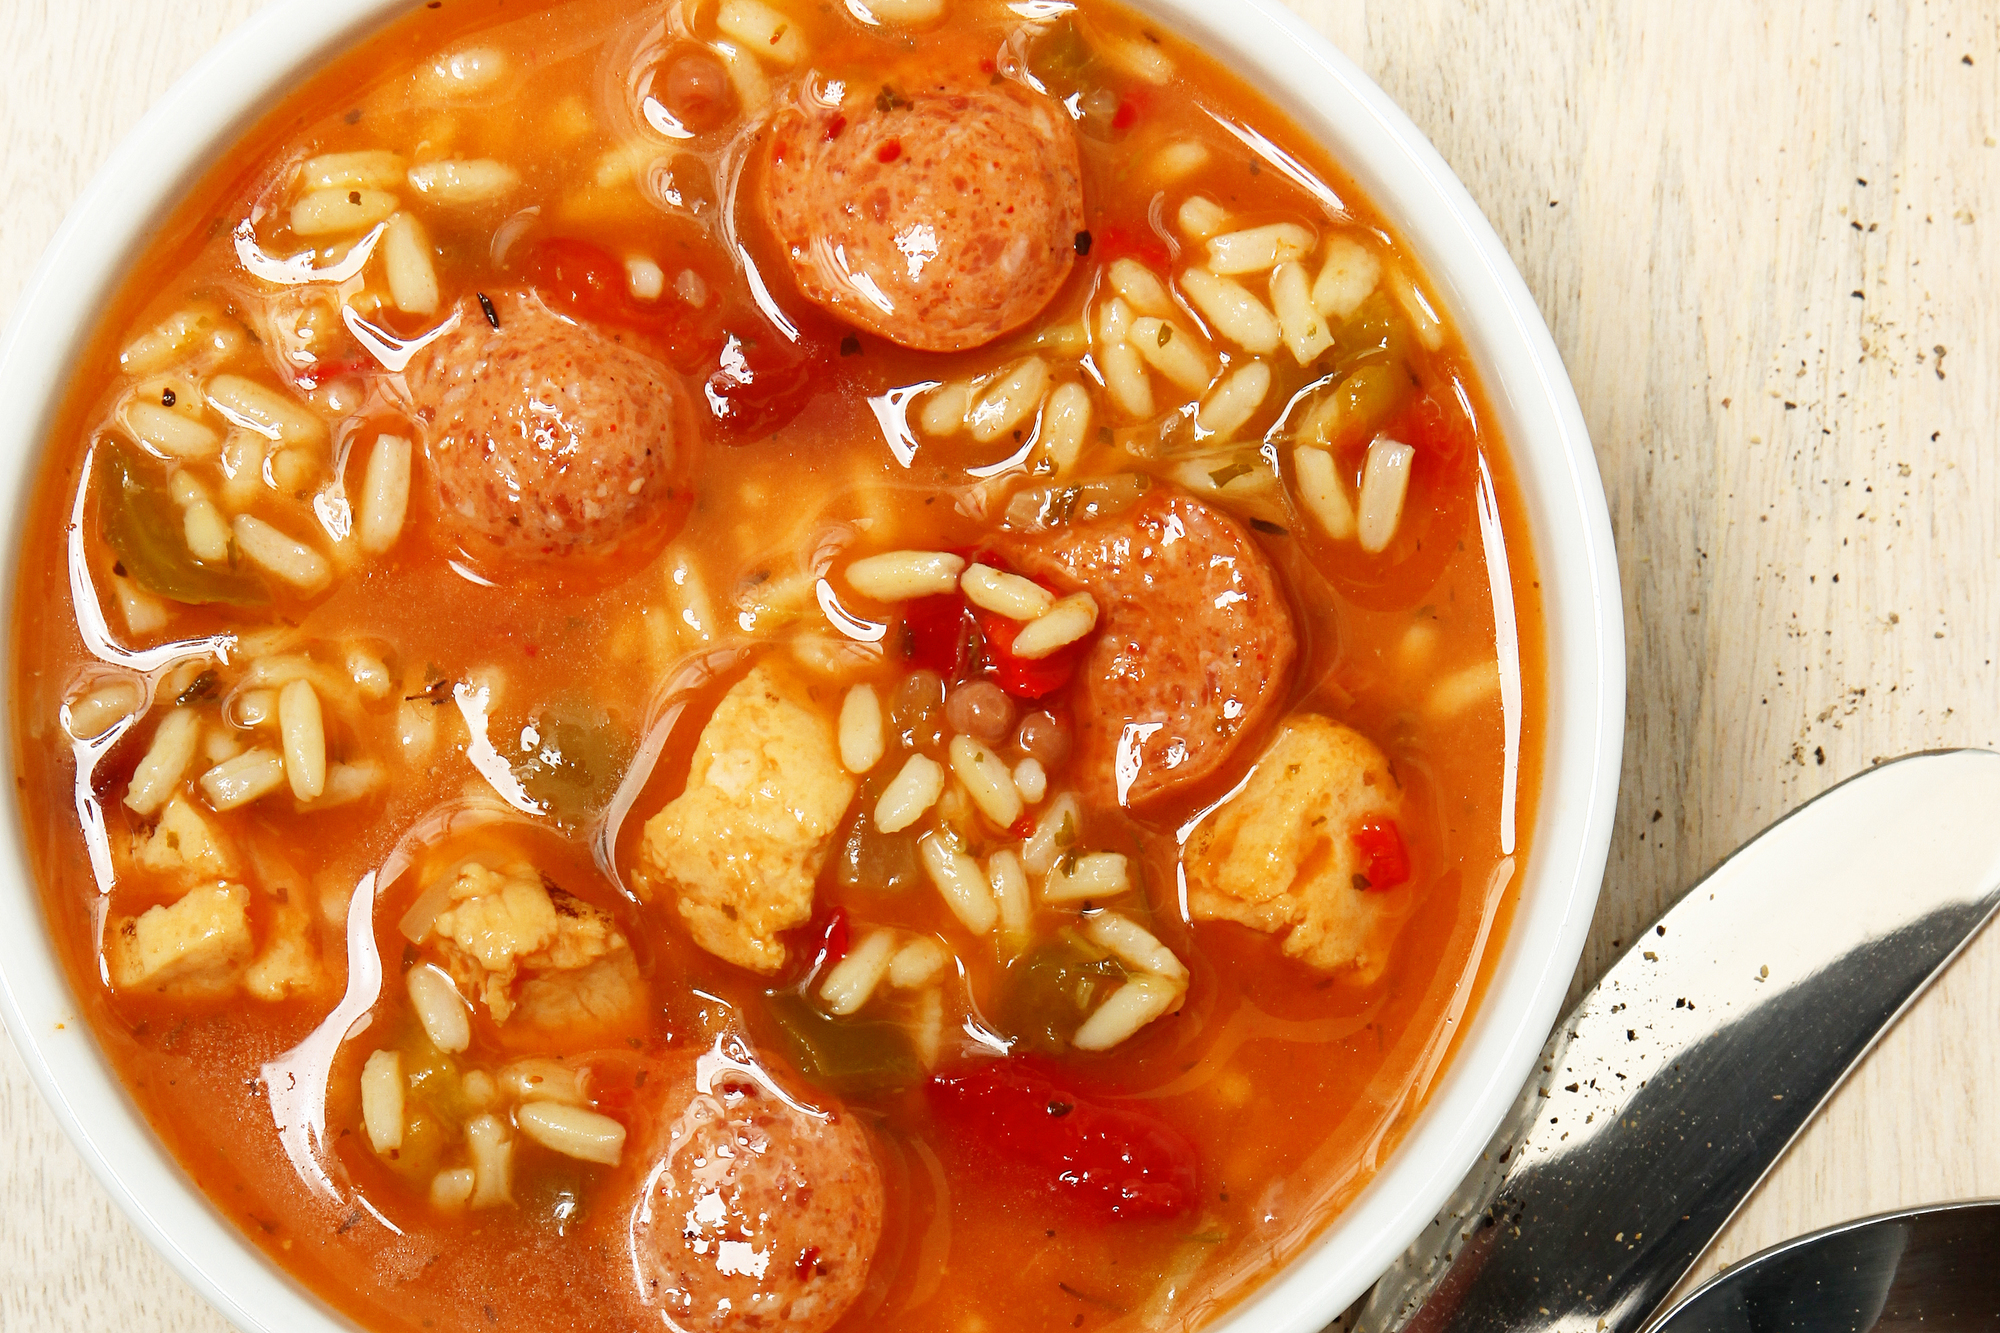 Bowl of Cajun Spicy Chicken and Sausage Gumbo Soup